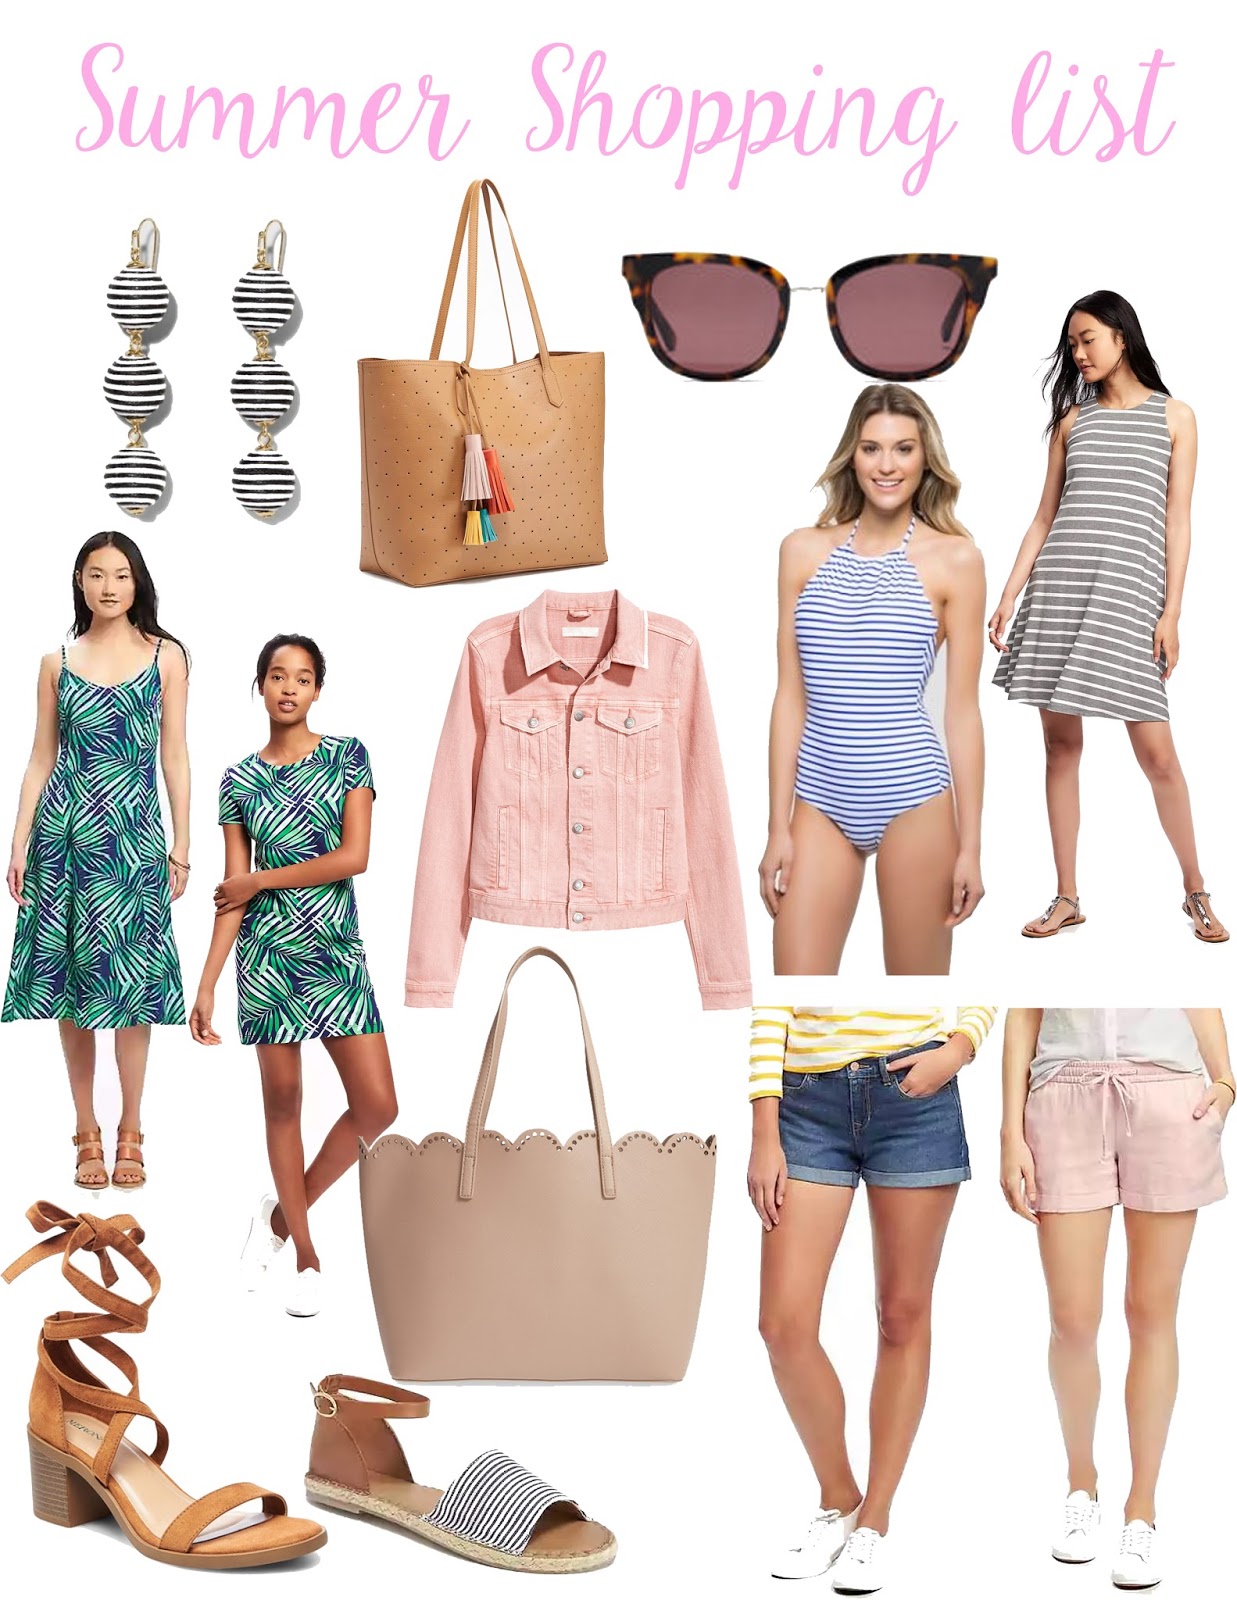 File to Style: SUMMER SHOPPING LIST